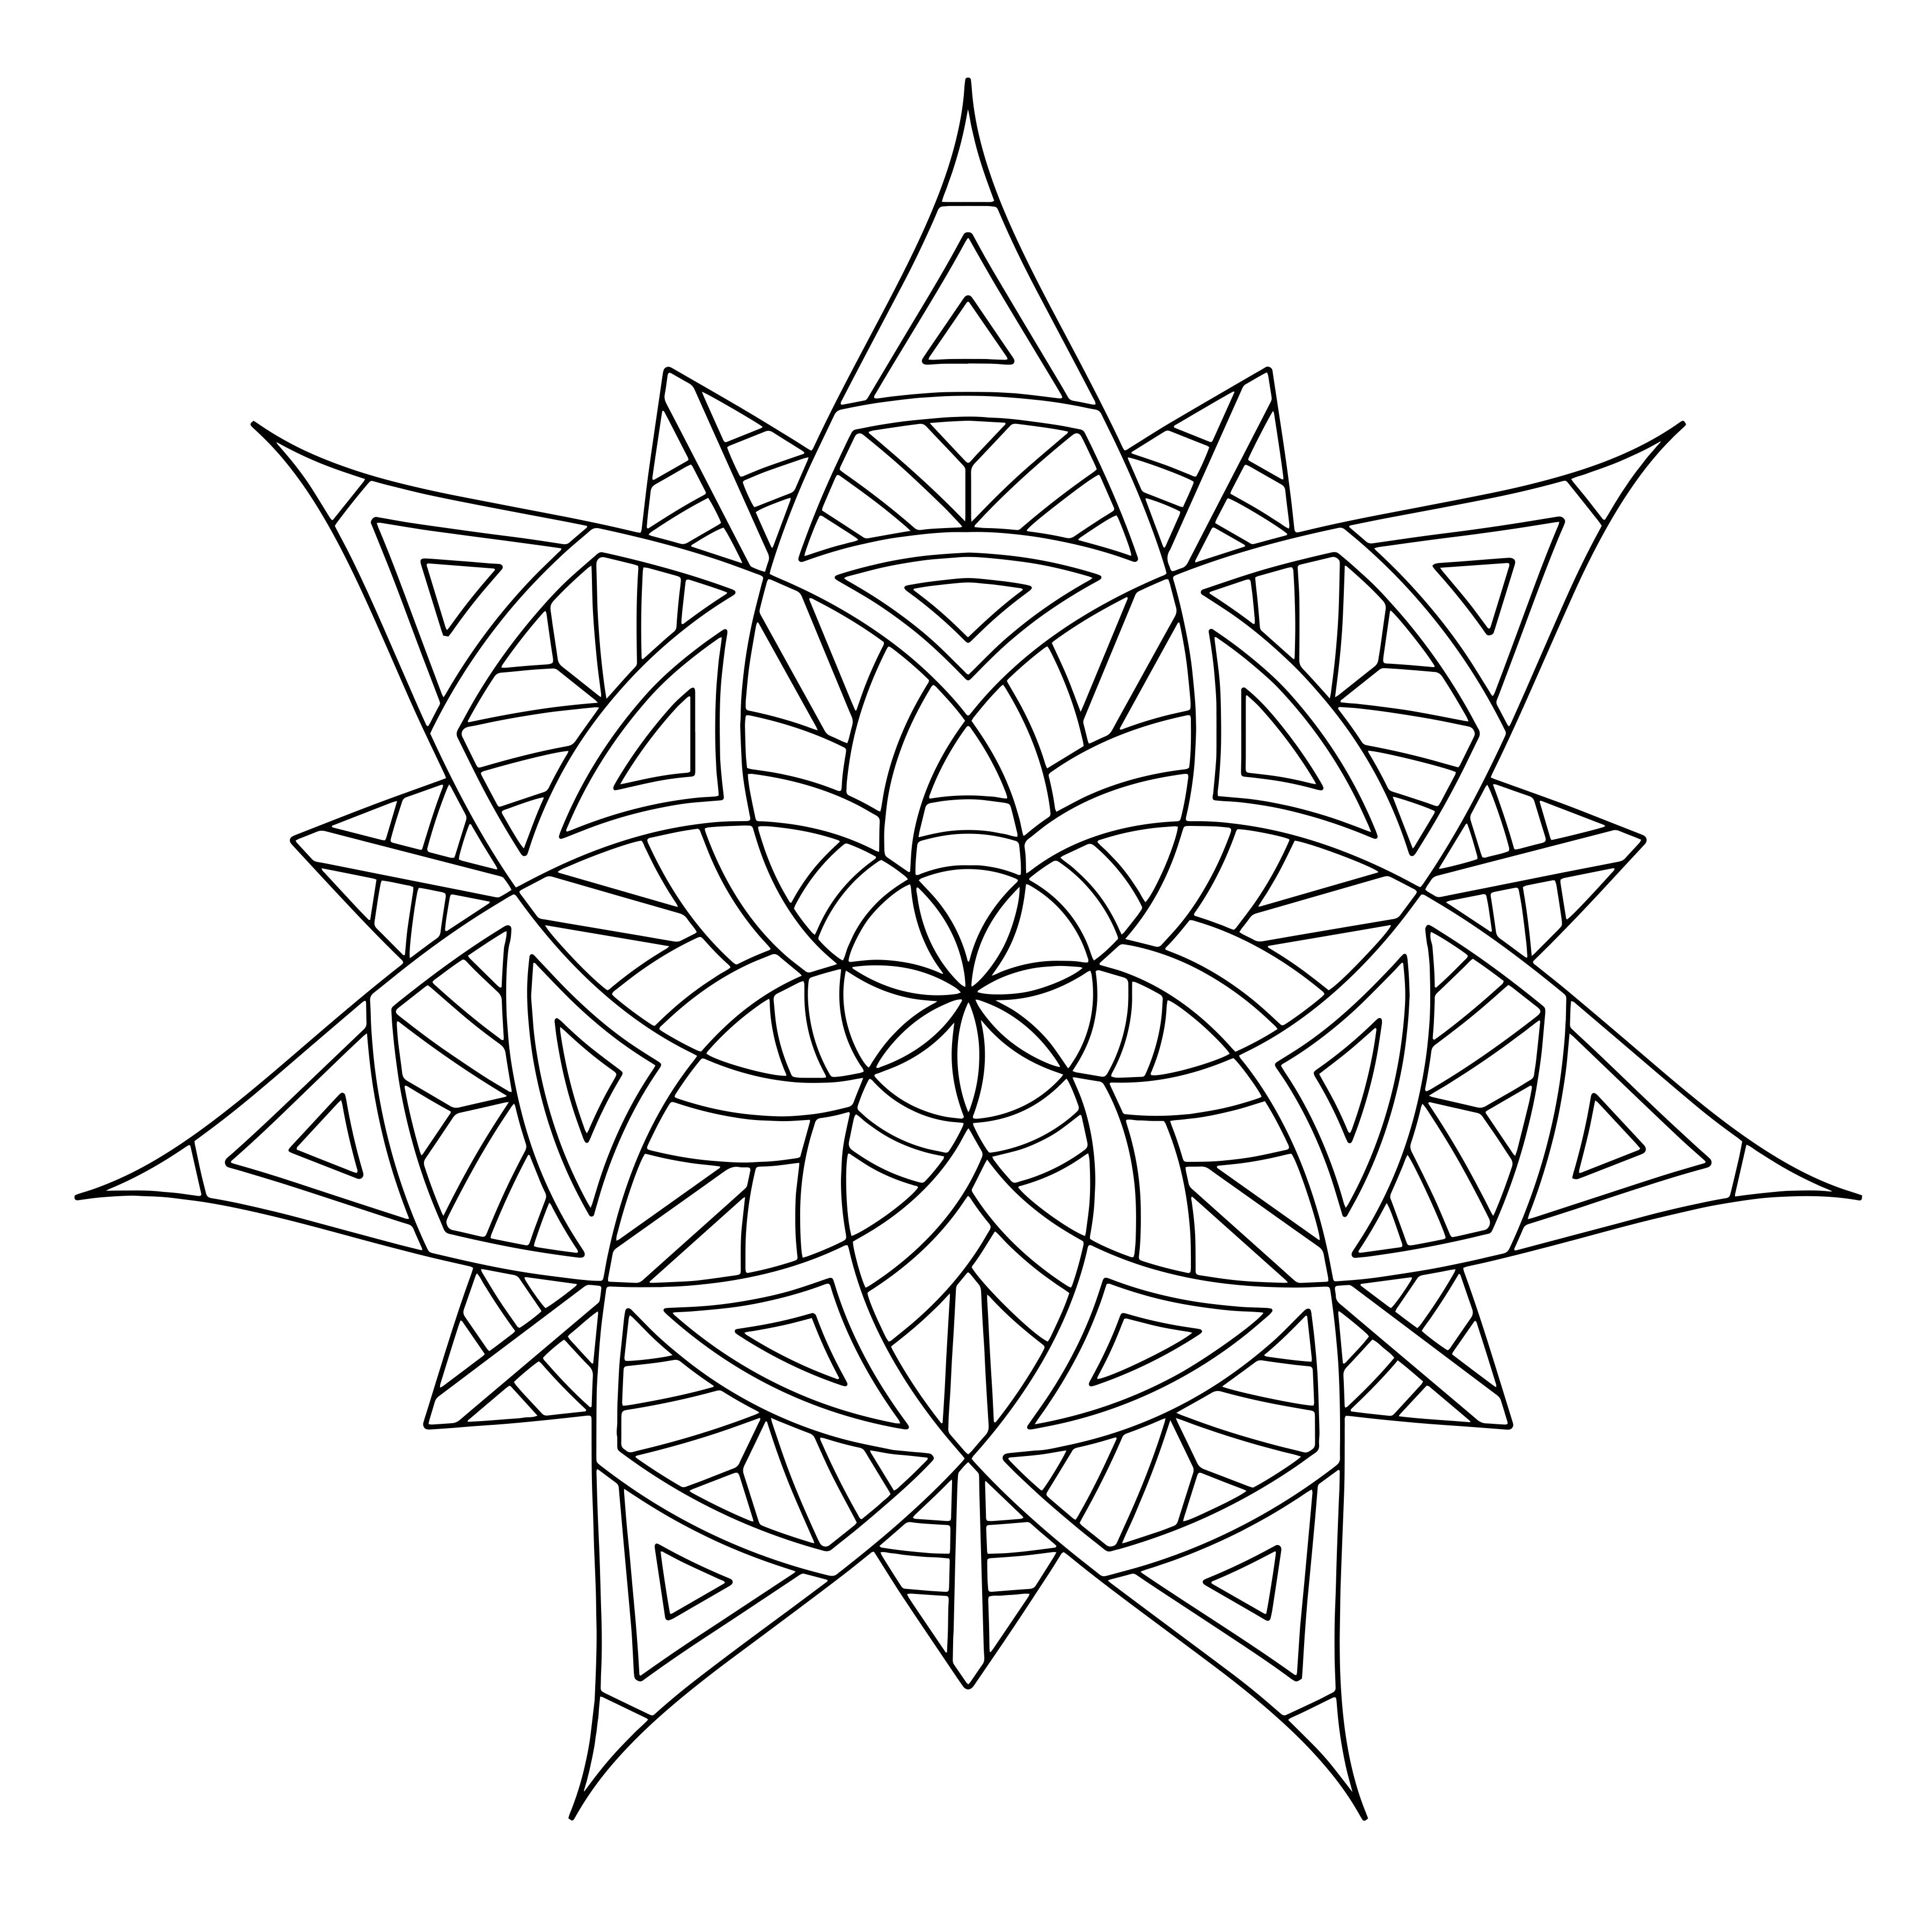 Coloring Pages For Adults Printable
 Free Printable Geometric Coloring Pages for Adults